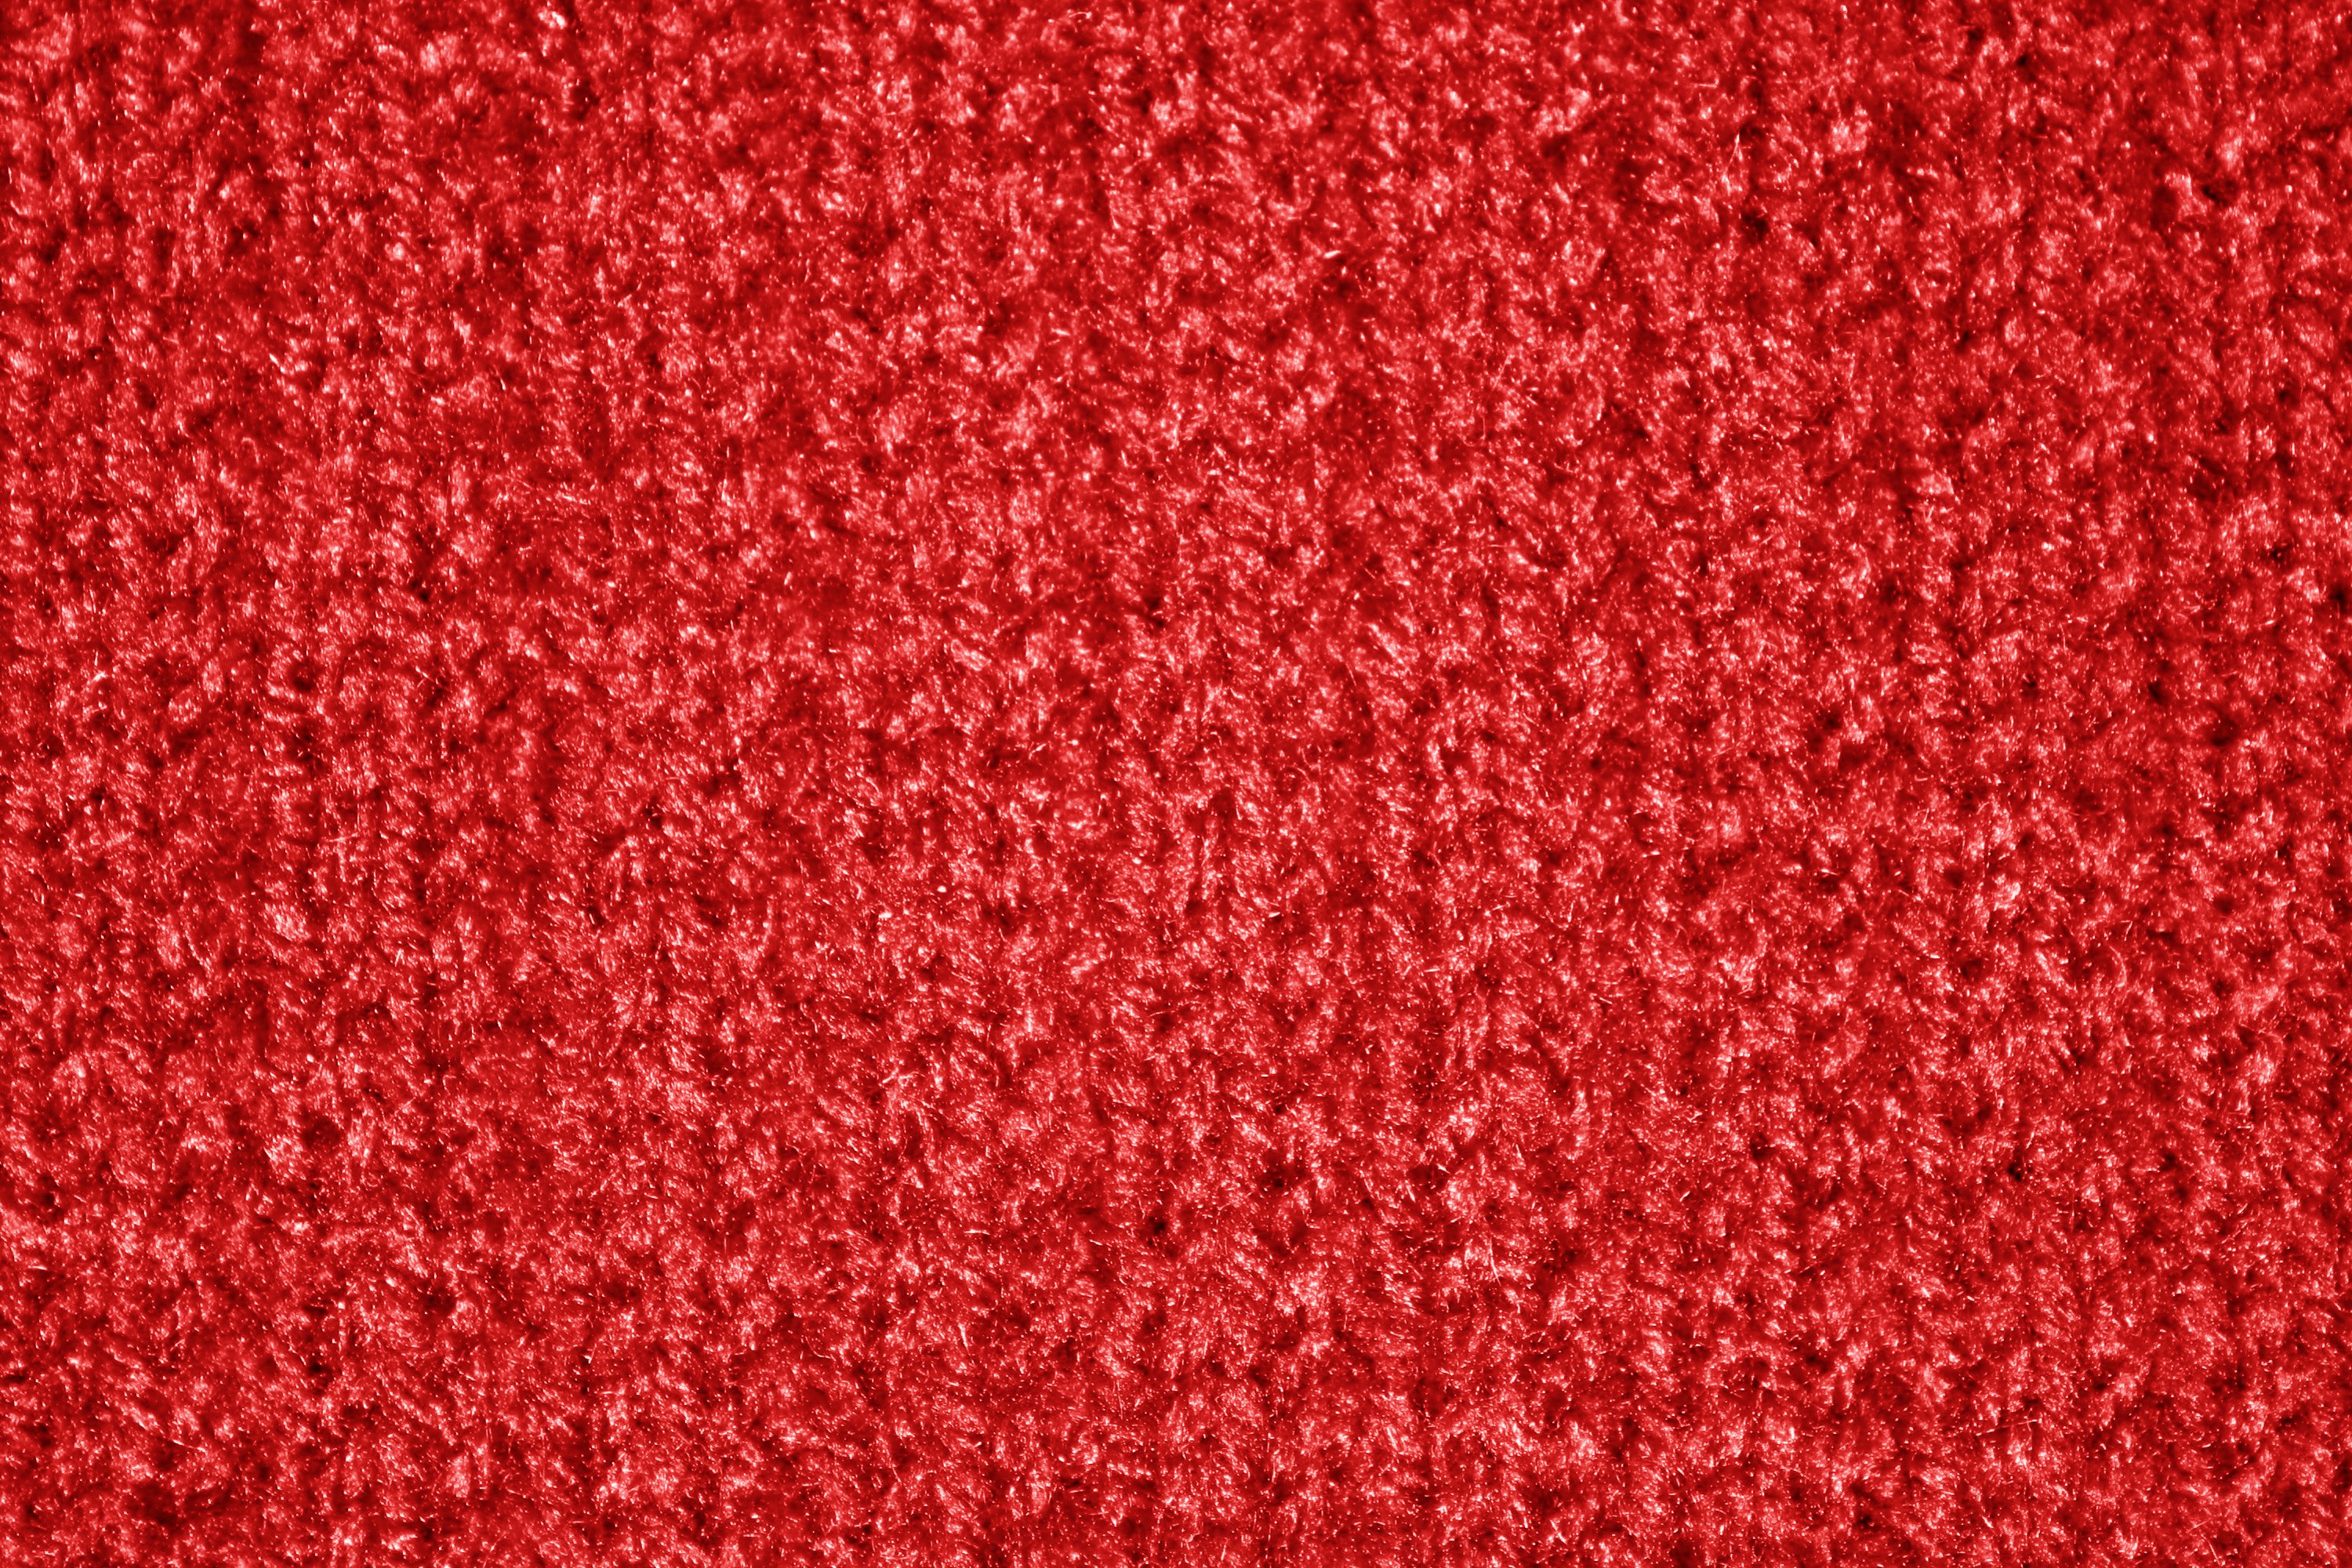 Red Knit Texture Picture, Free Photograph